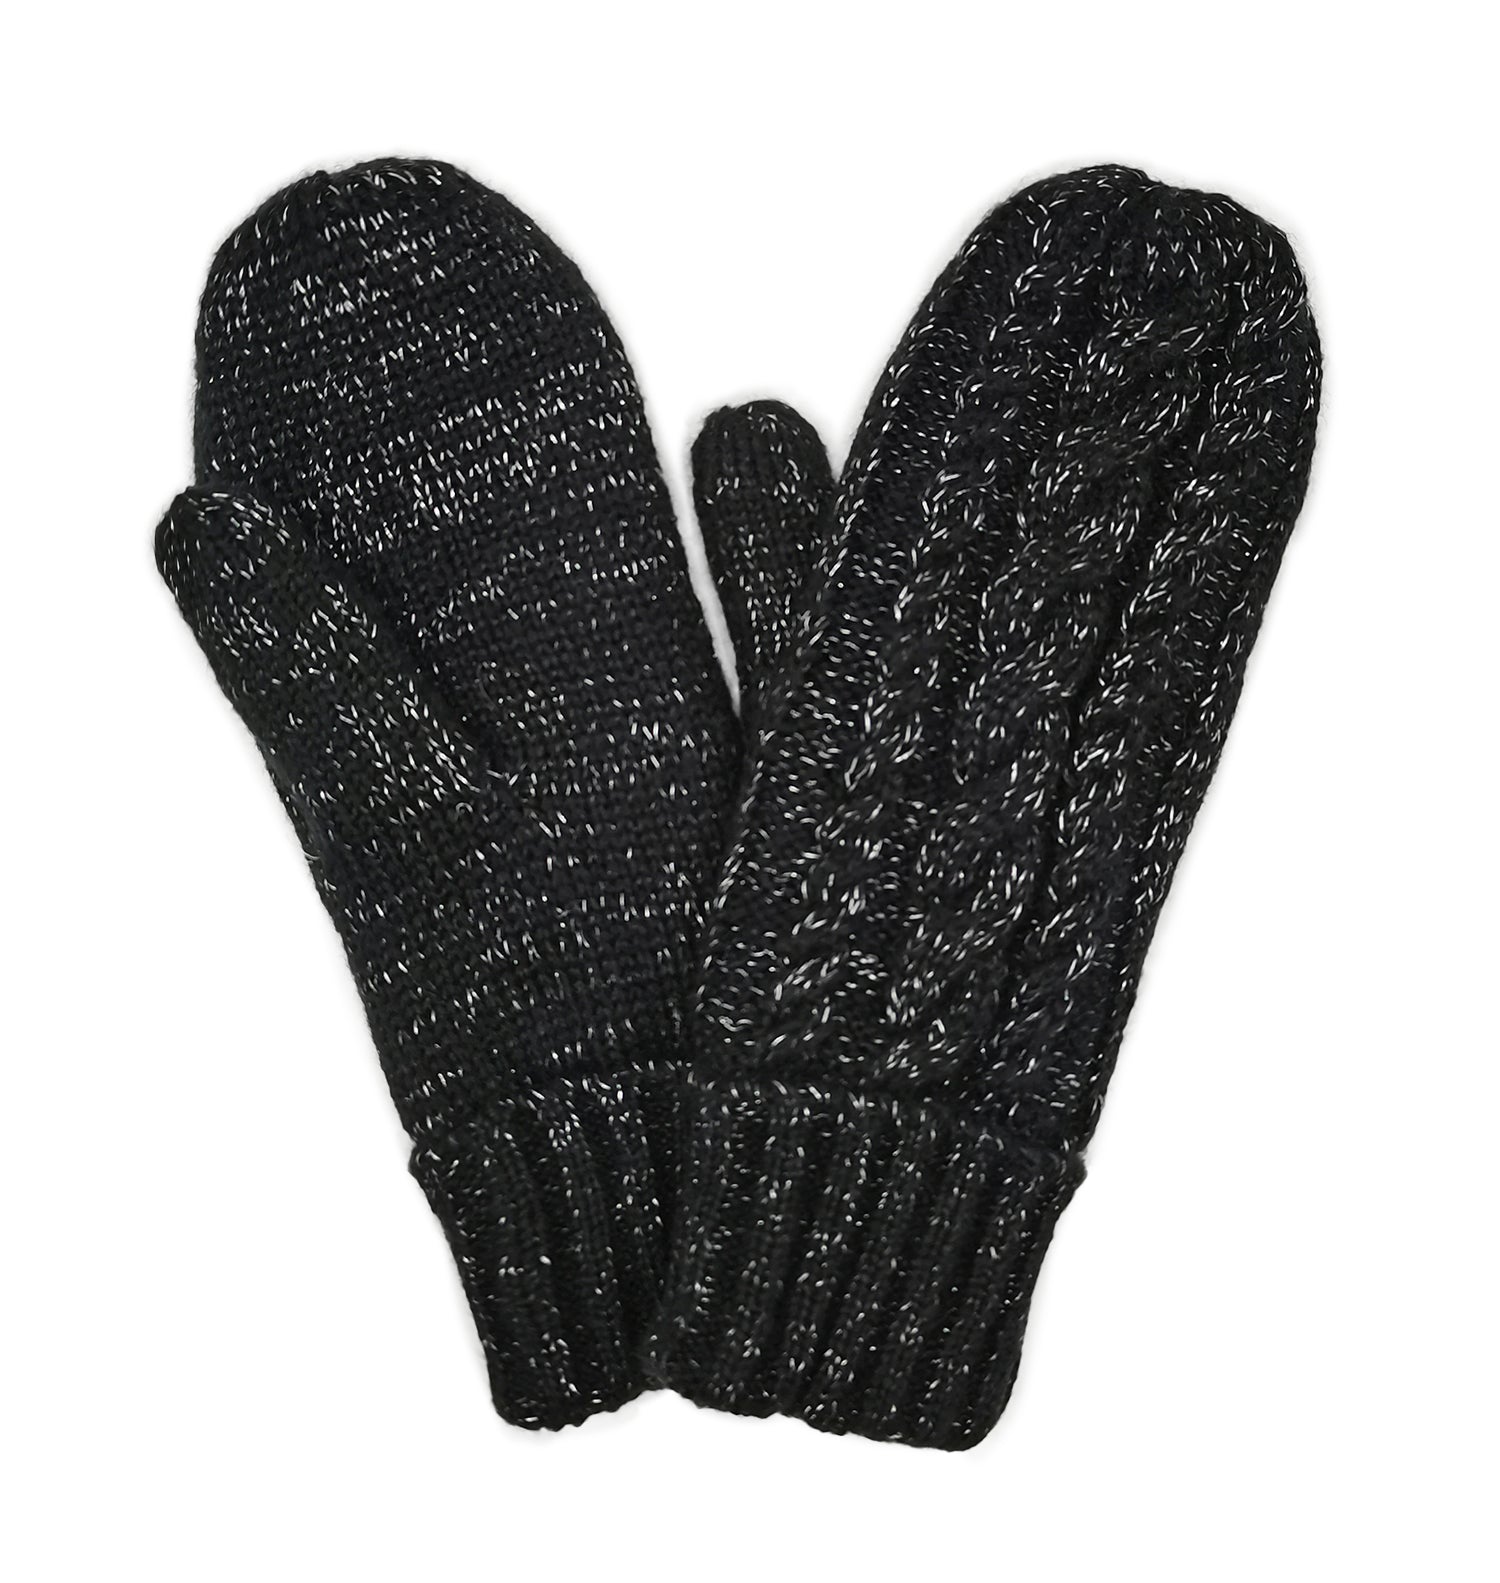 Shop for KW Fashion Cable Knit Mittens With Sherpa Lining  at doeverythinginloveny.com wholesale fashion accessories